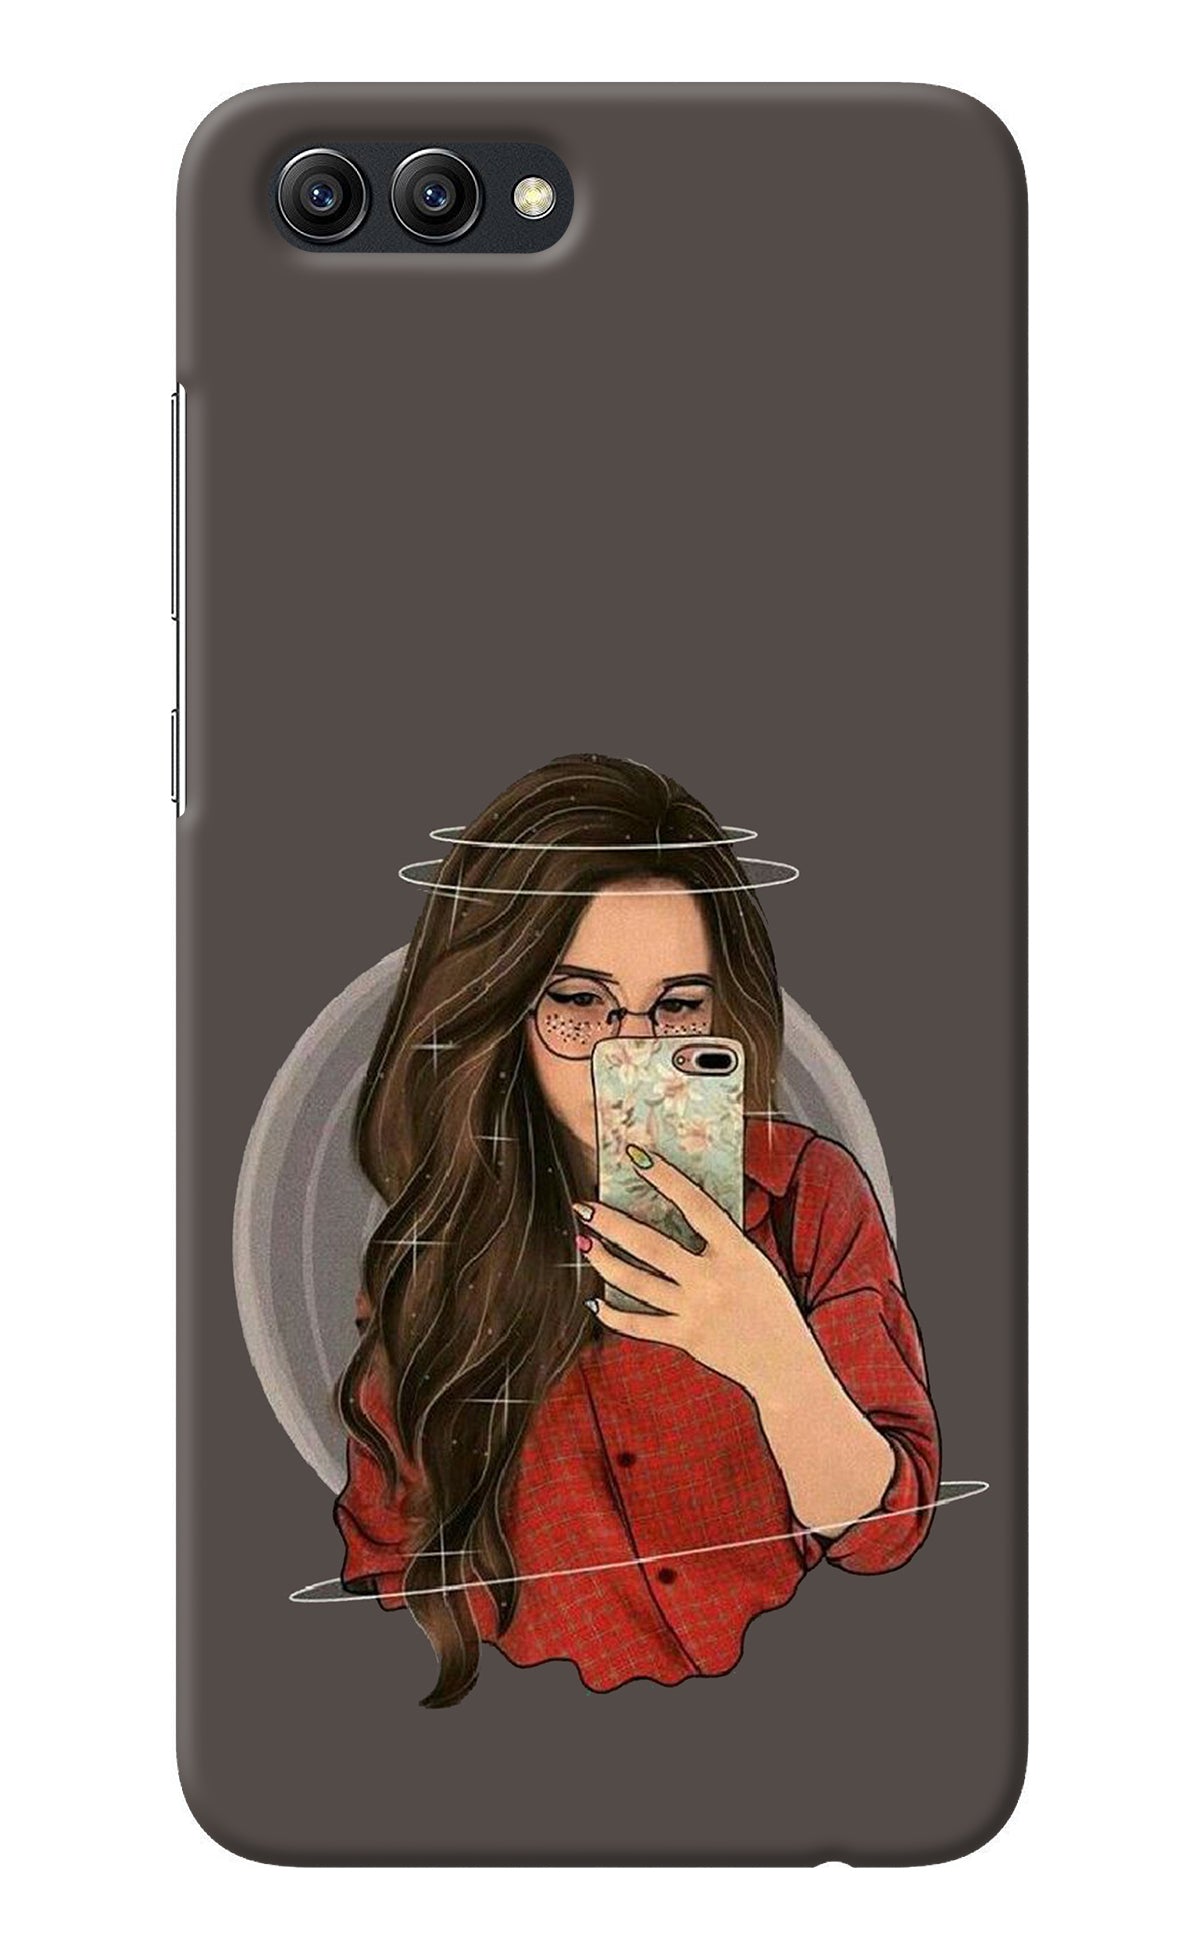 Selfie Queen Honor View 10 Back Cover